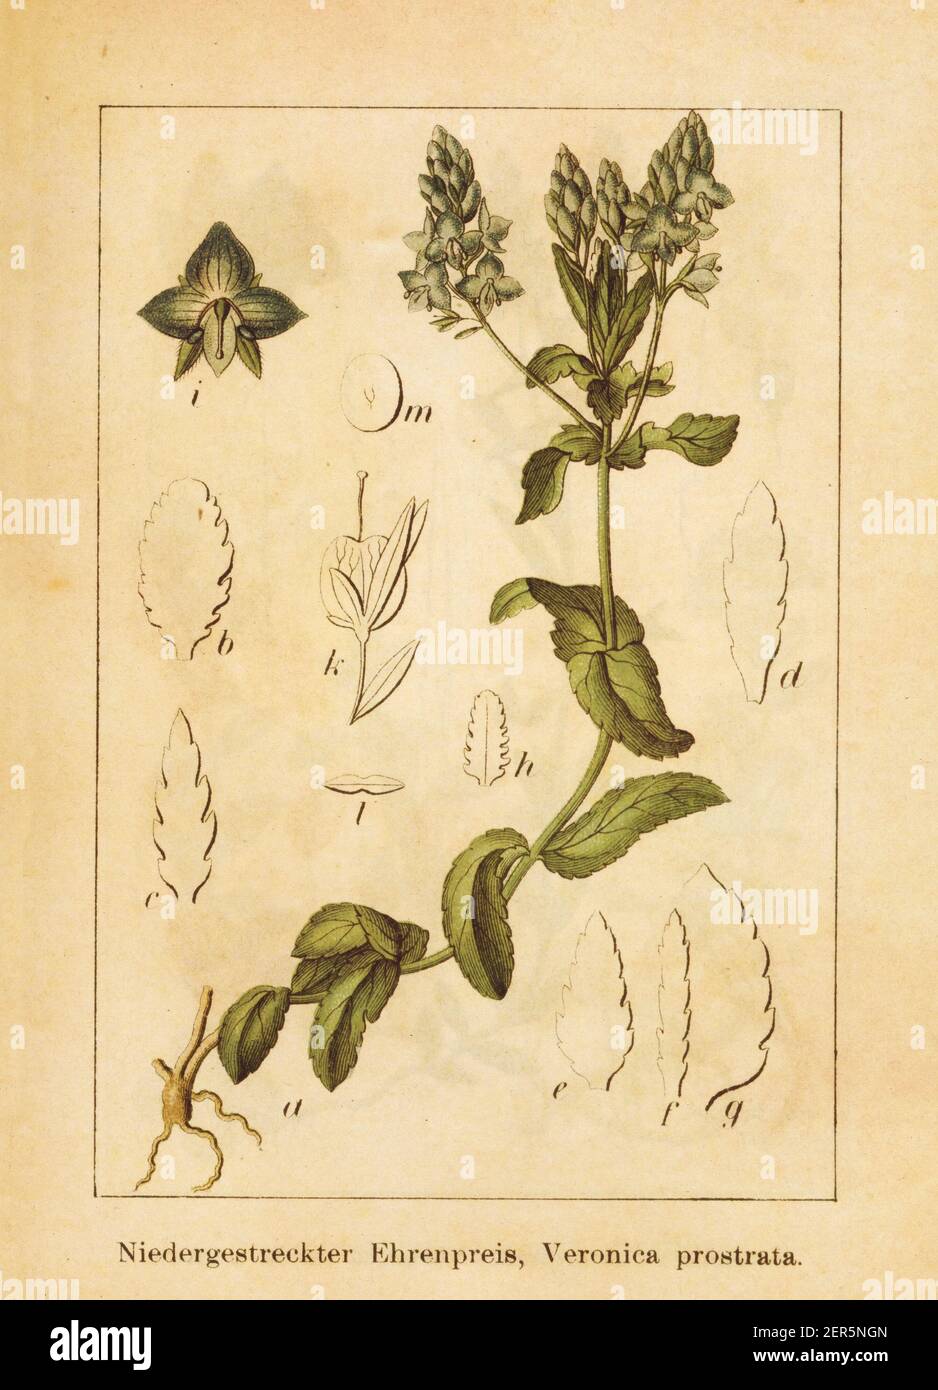 Antique illustration of a veronica prostrata, also known as sprawling speedwell or prostrate speedwell. Engraved by Jacob Sturm (1771-1848) and publis Stock Photo